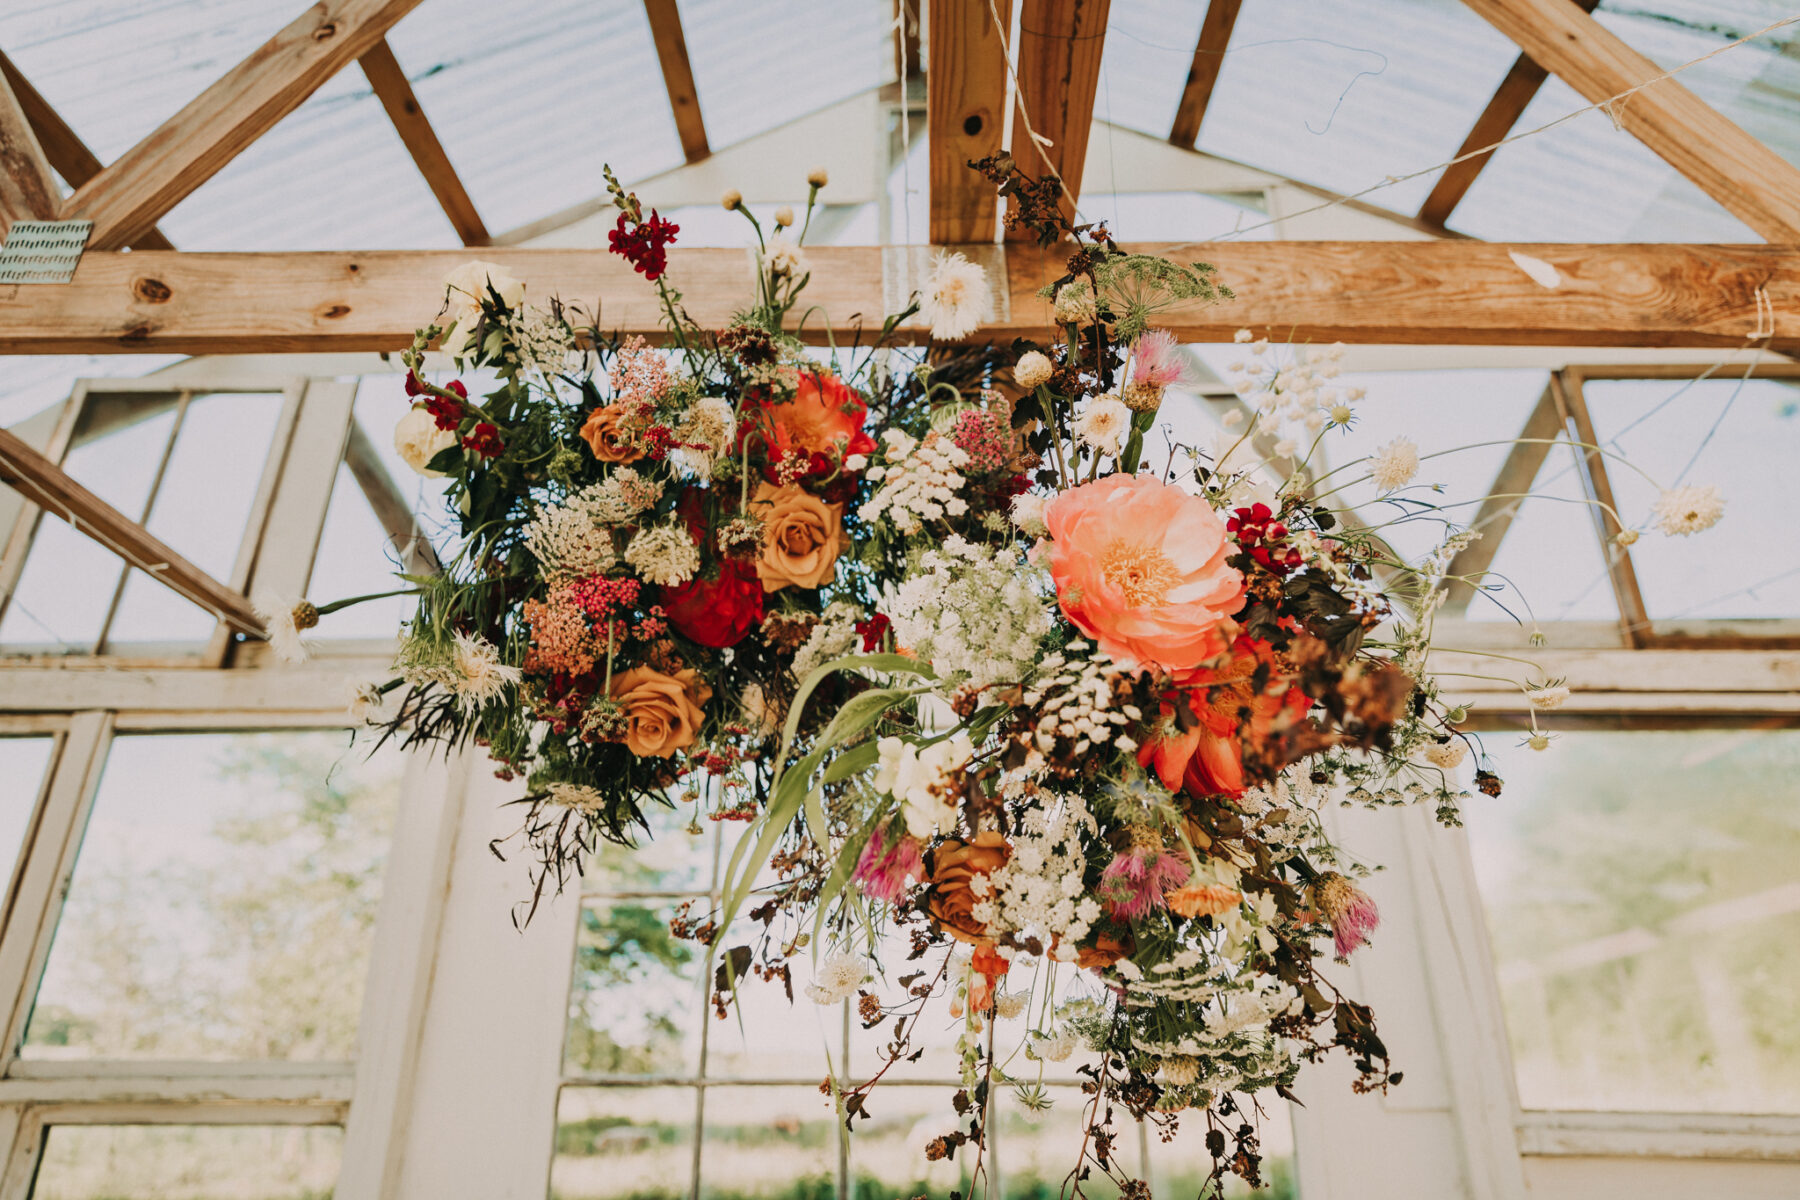 Hanging floral chandelier at wedding ceremony: Flower Farm Styled Shoot by Billie-Shaye Style featured on Nashville Bride Guide